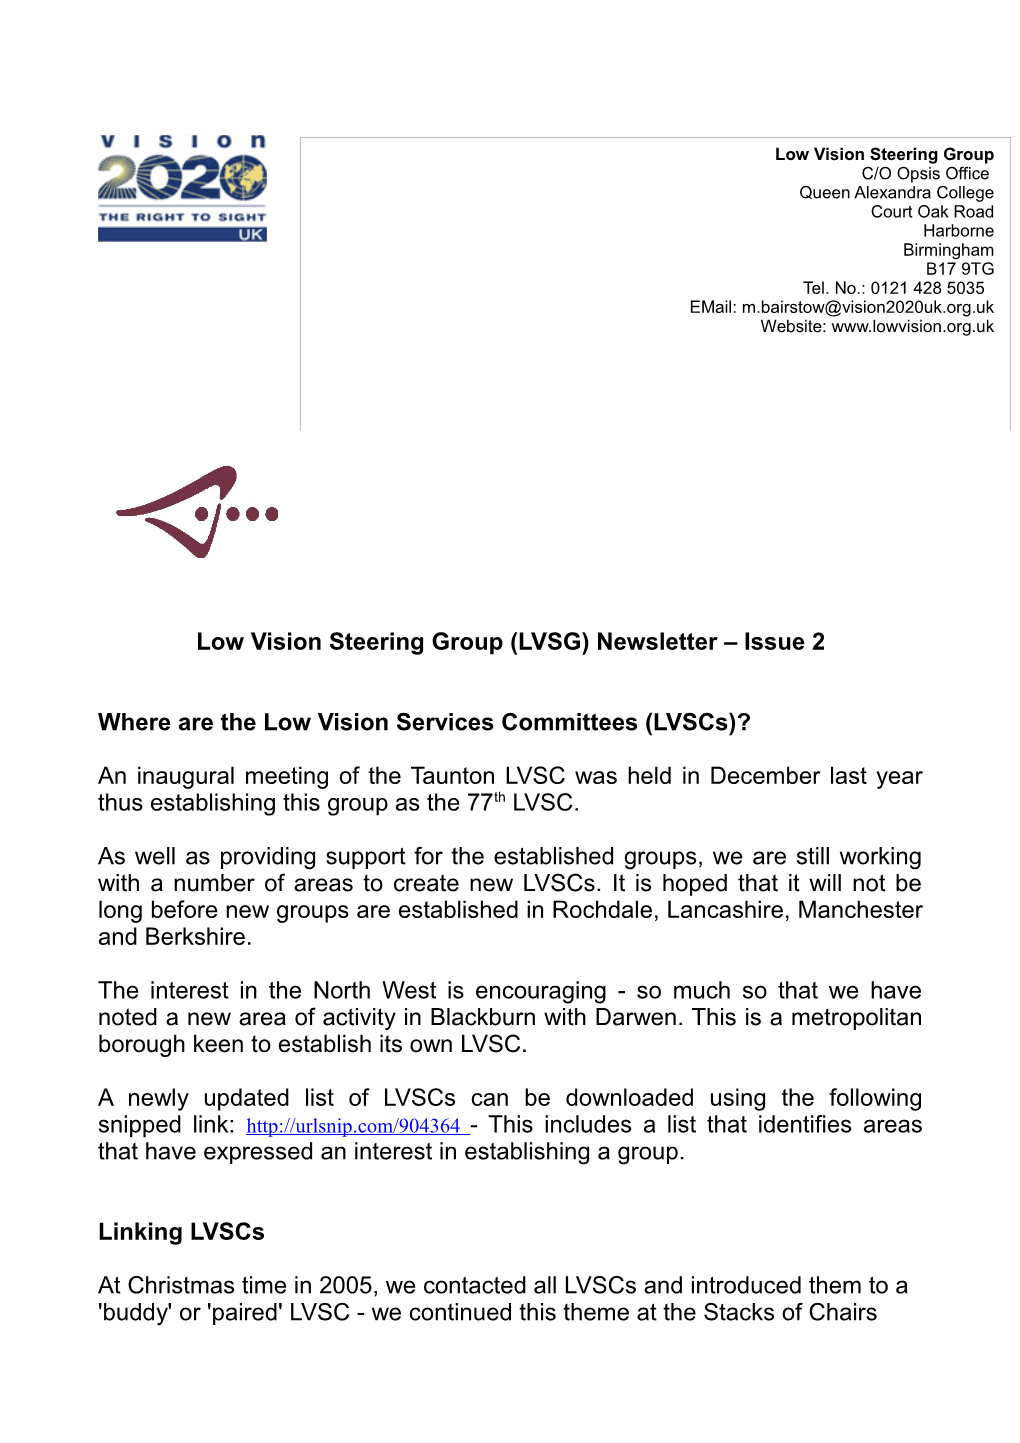 Low Vision Steering Group (LVSG) Newsletter Issue 2